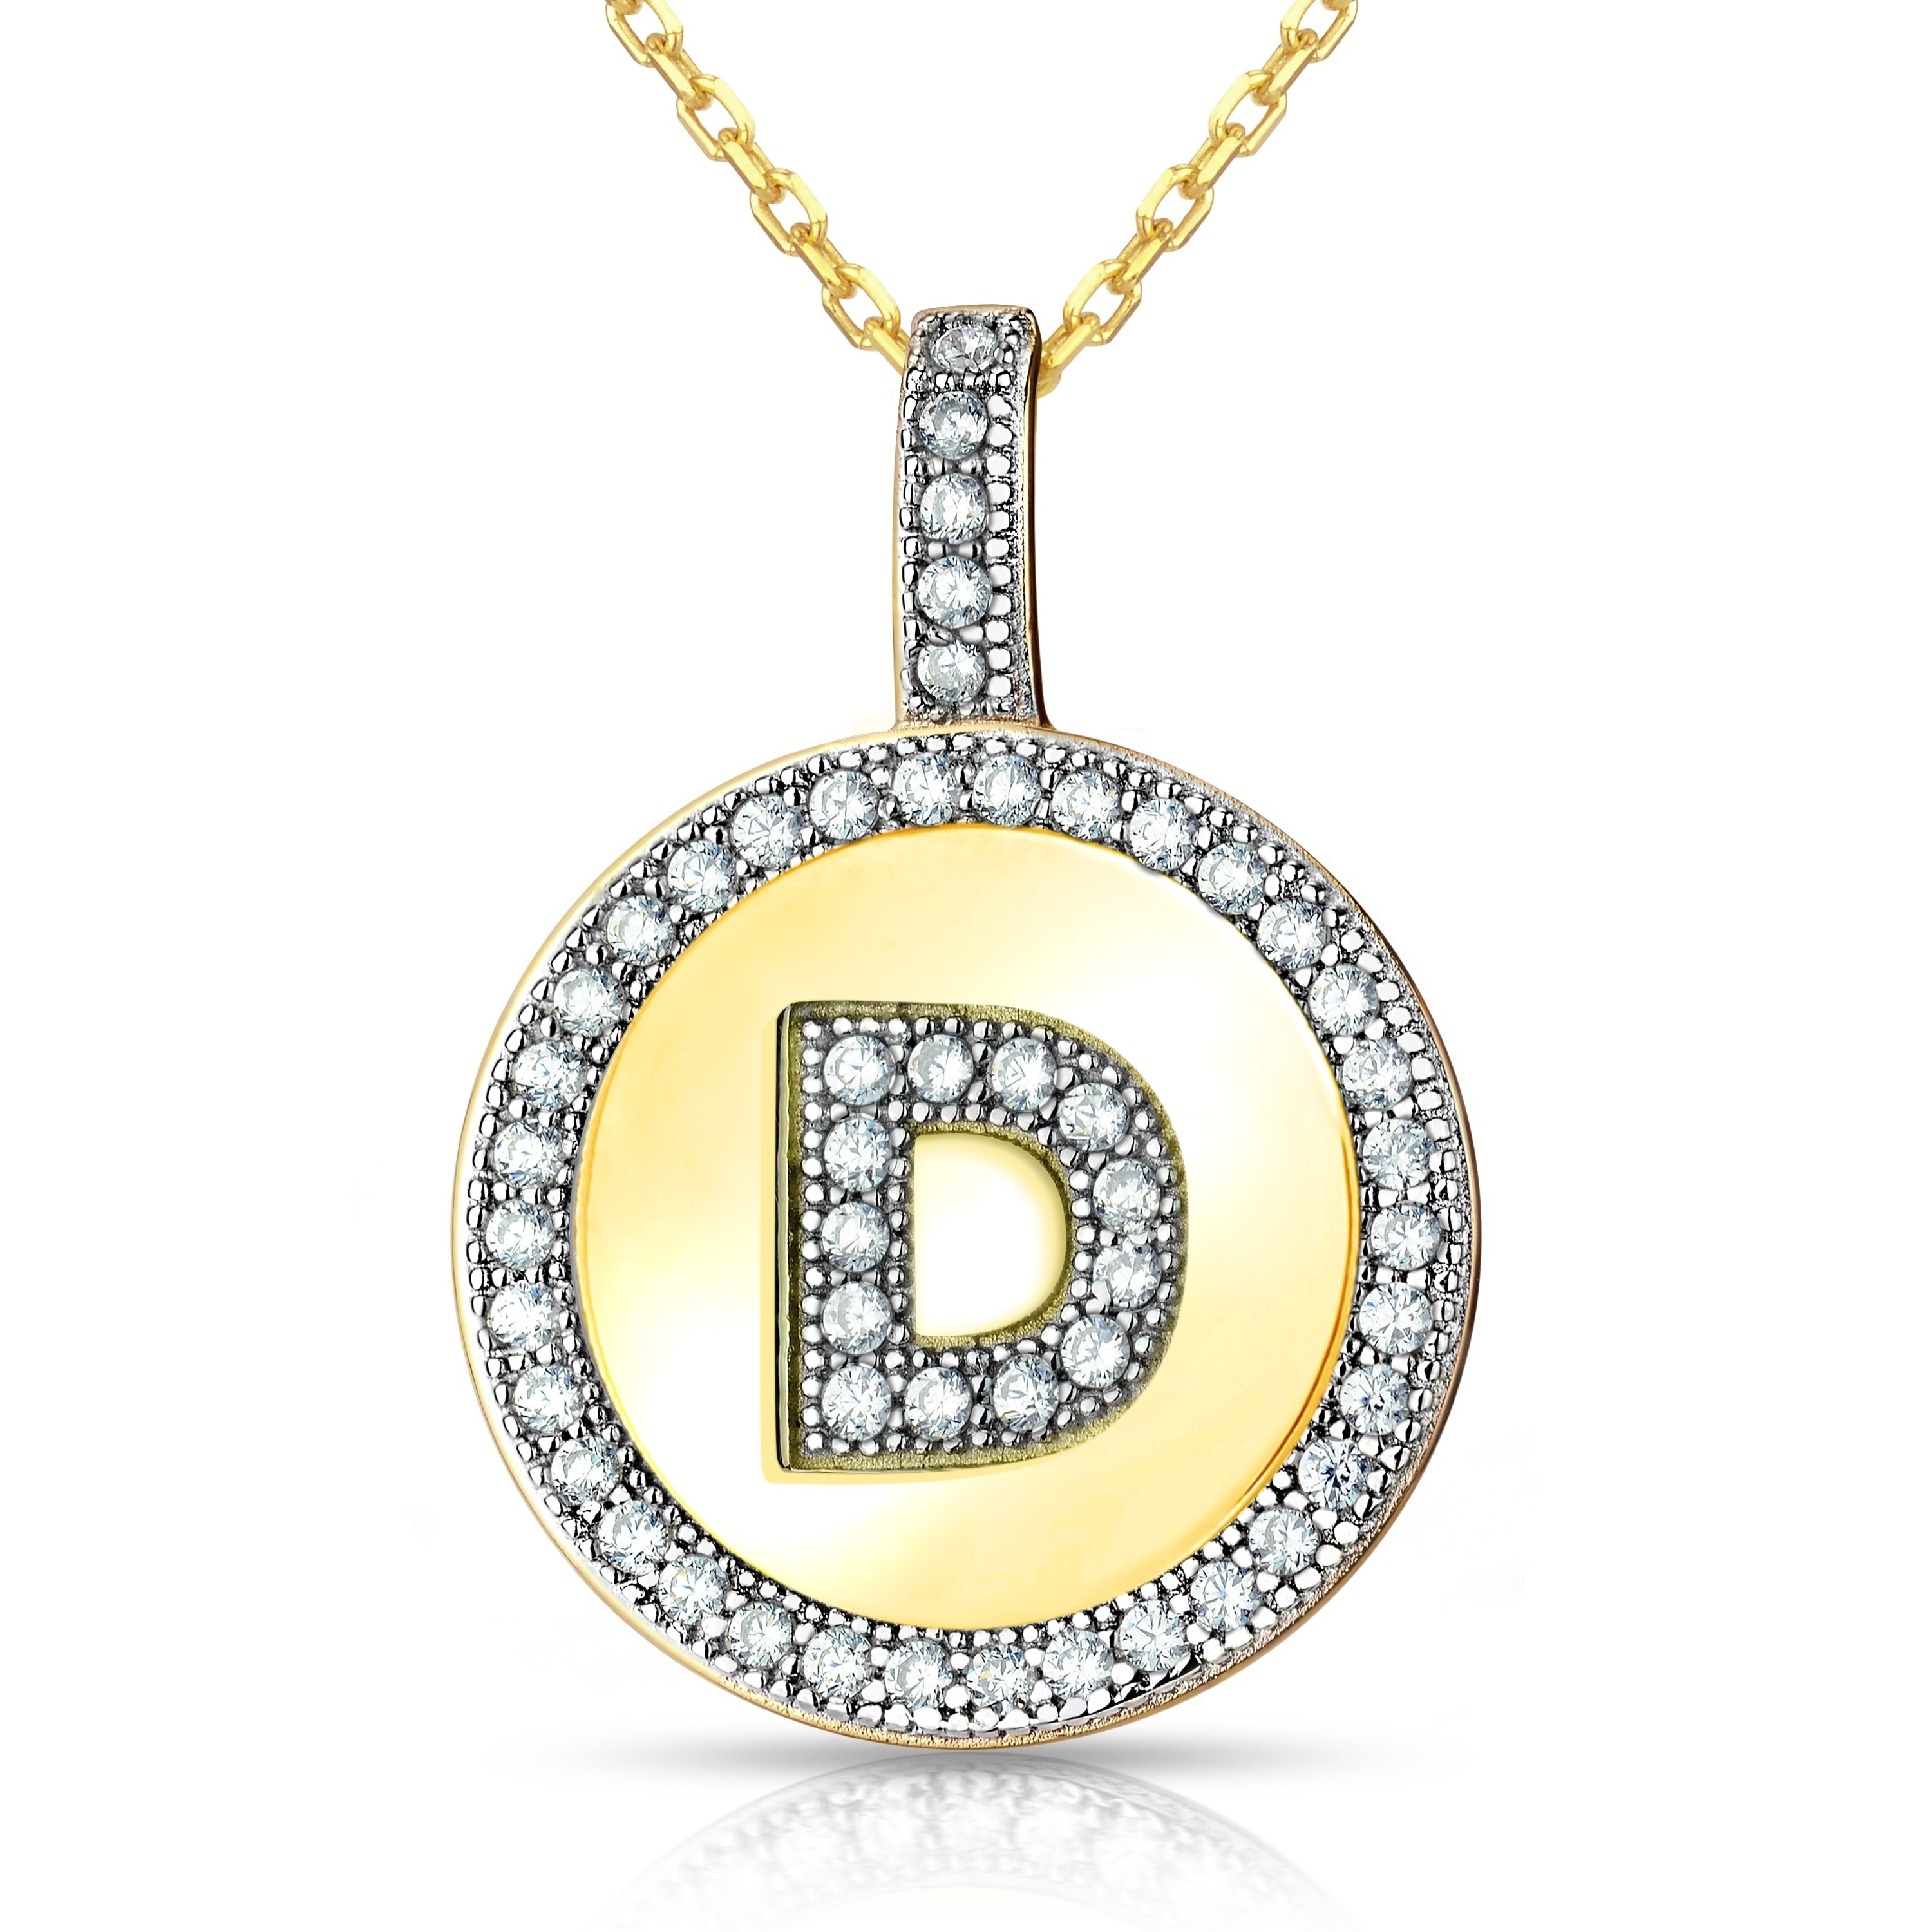 Details about  / Genuine Pave Diamond Disc Pendant Gold Plated 925 Silver 18/" Link Chain Jewelry